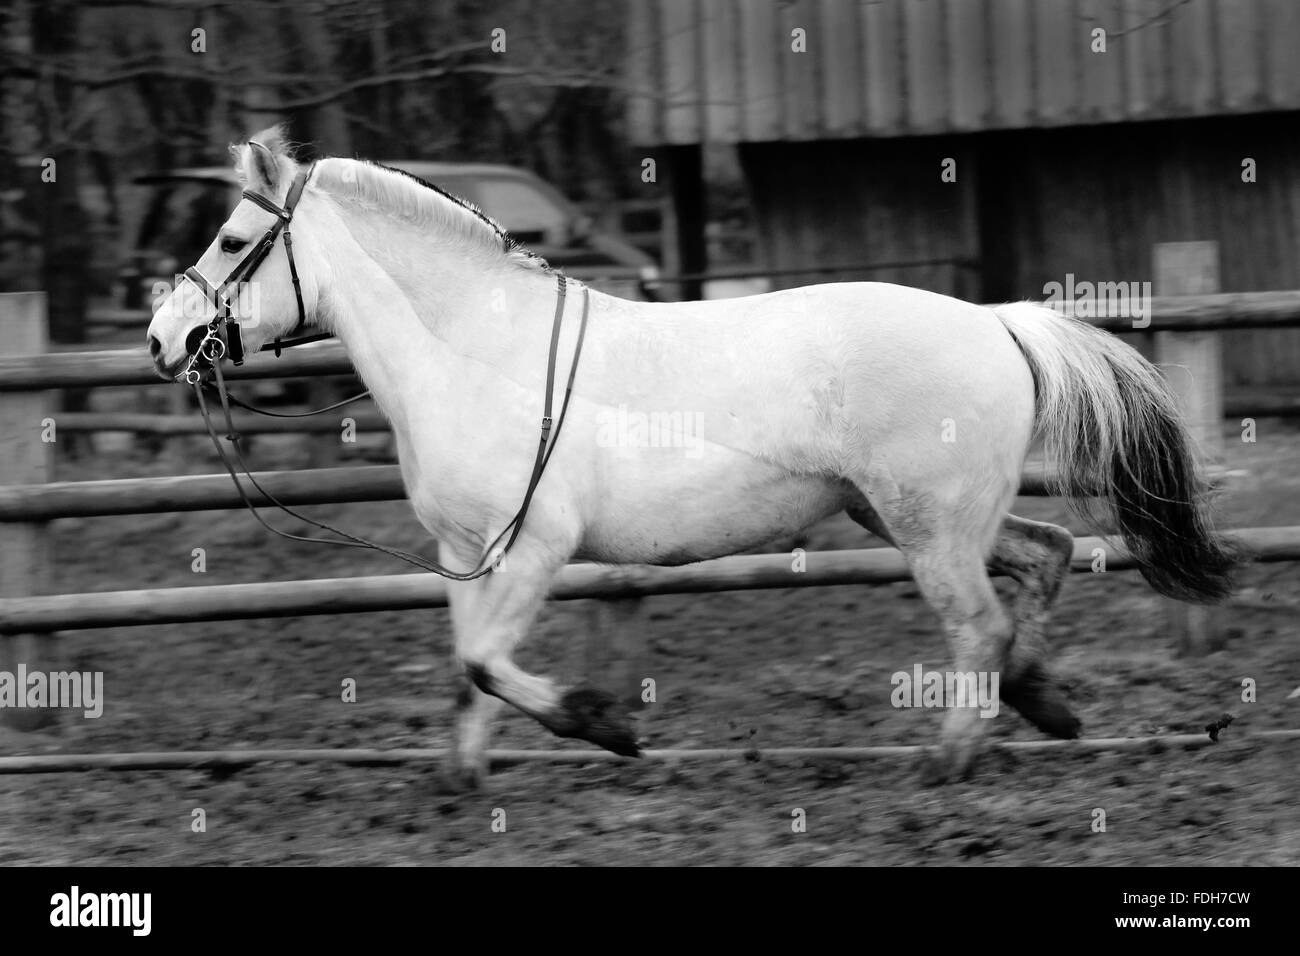 CARDIFF, WALES. January 24 2016. A Fjord mare named Indium stands partially tacked up in a muddy field. copyright - Cat Lothiab Stock Photo